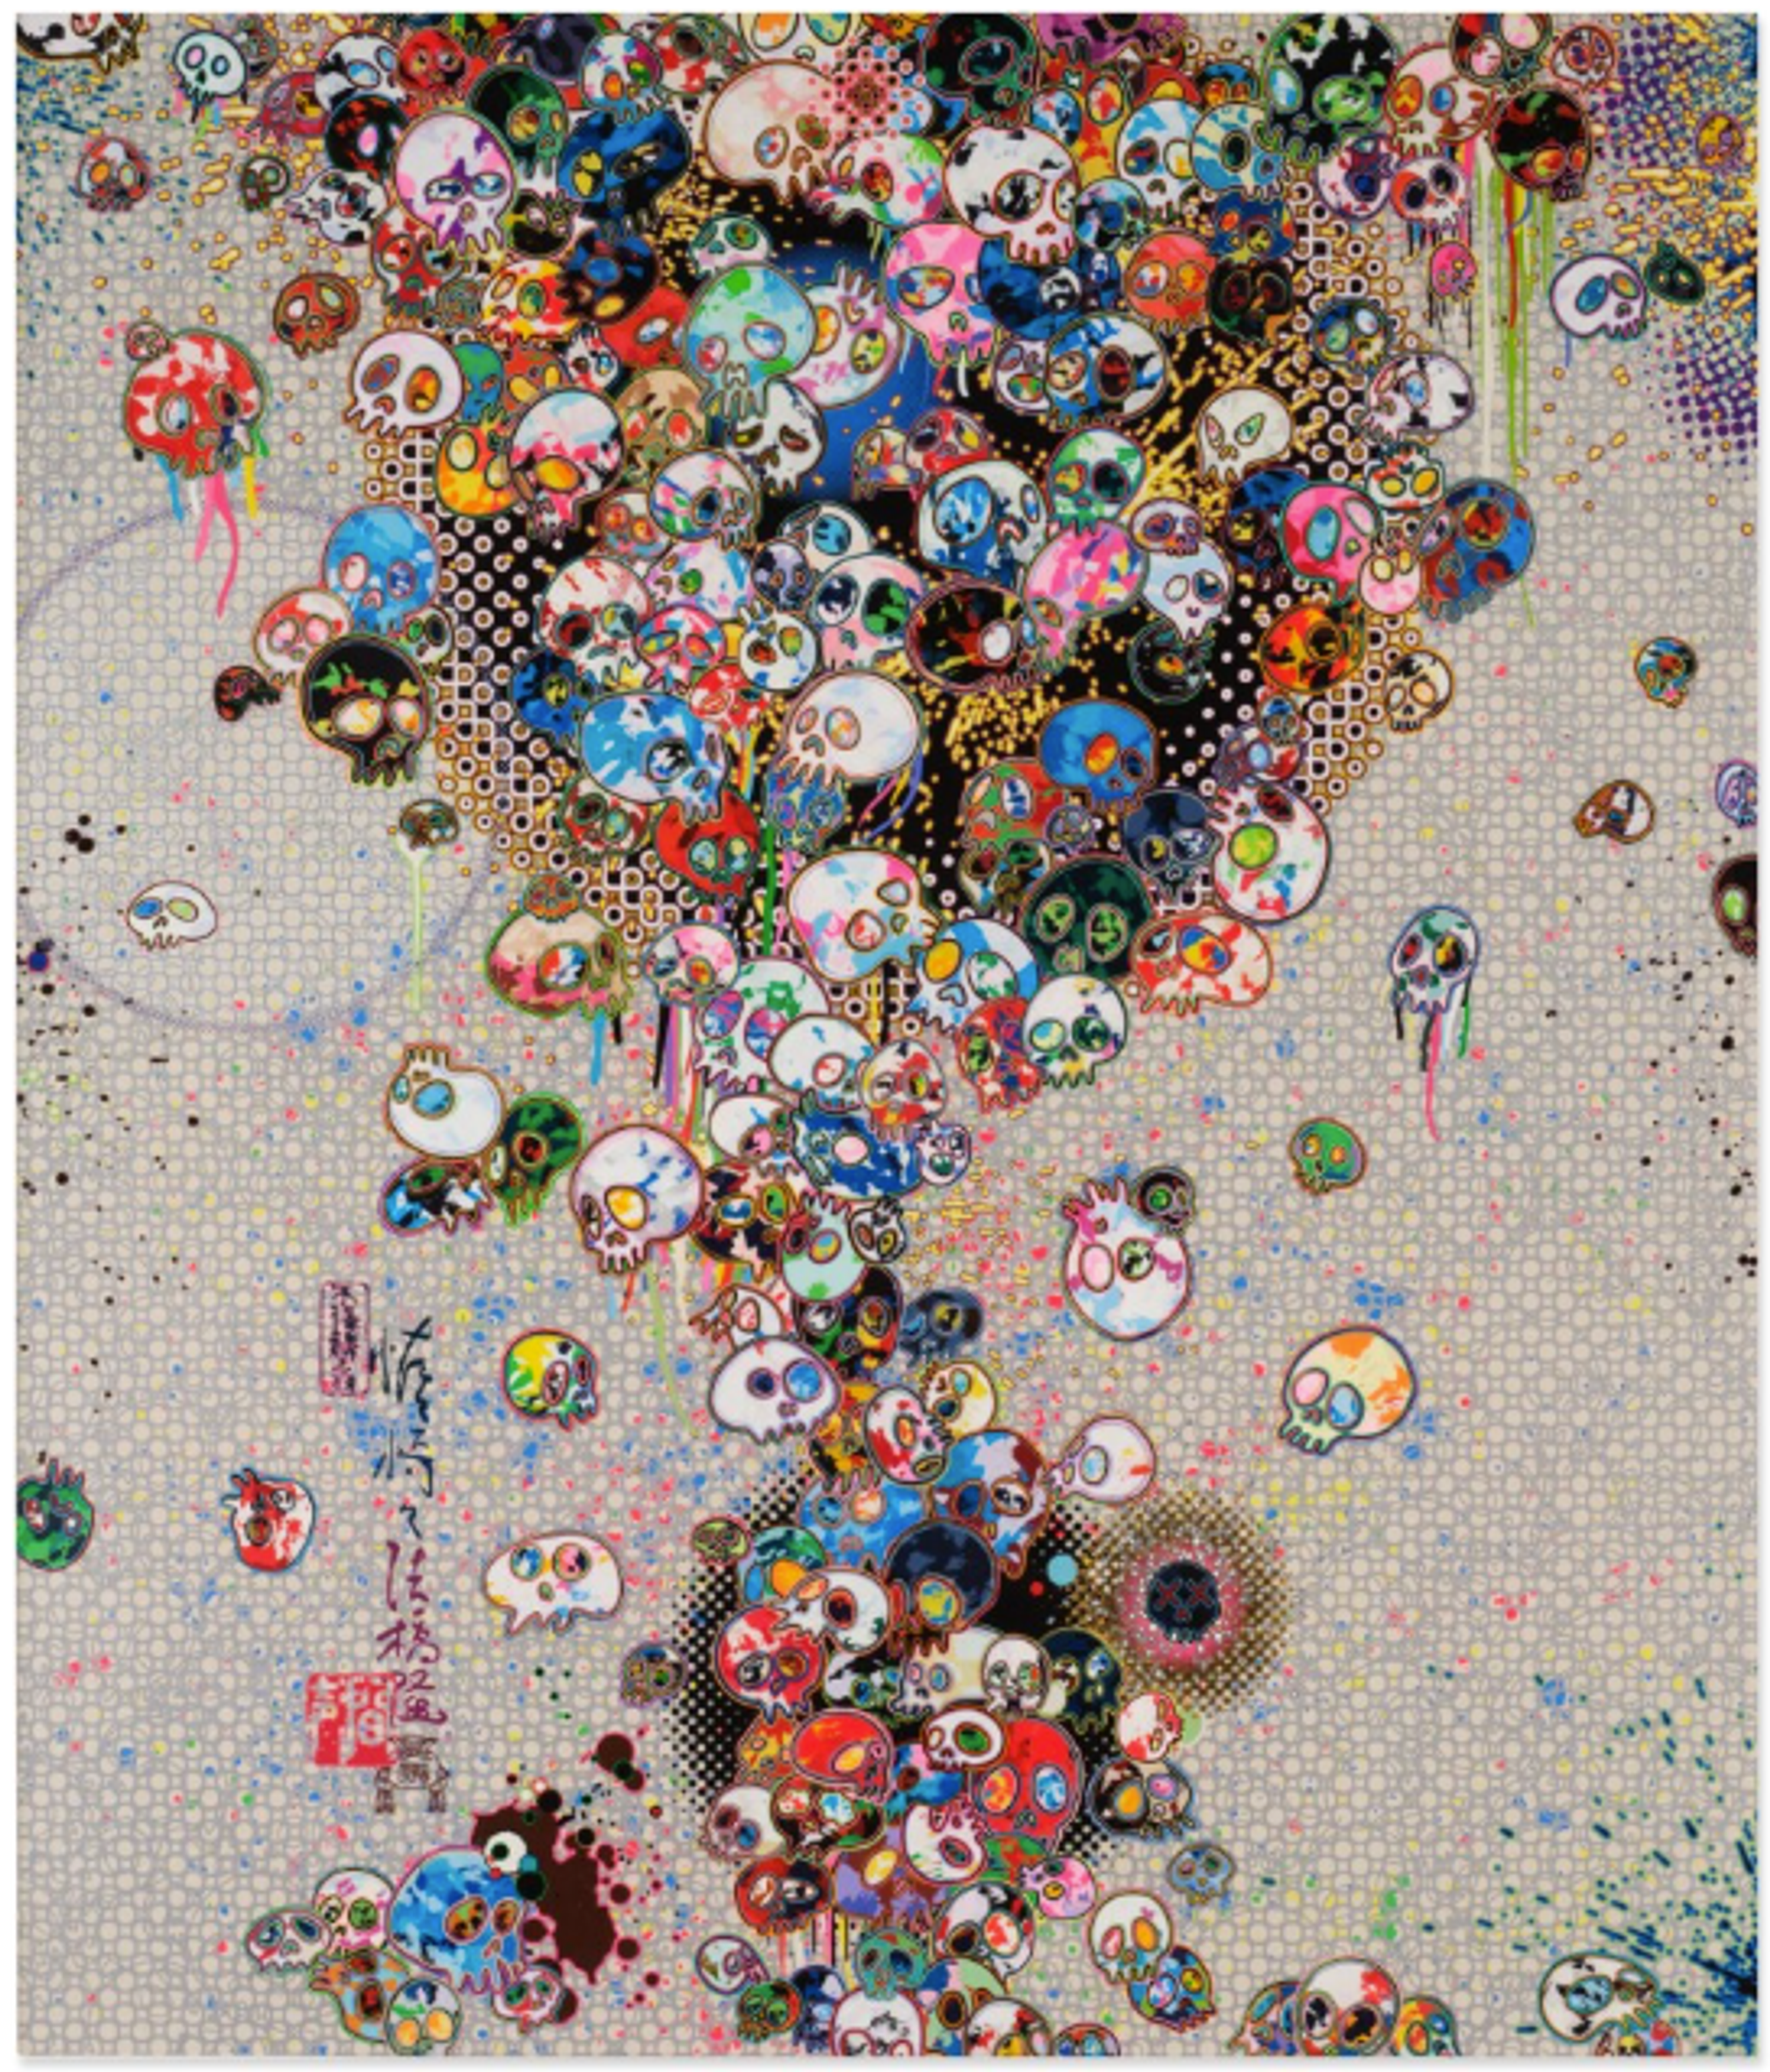 In Death, Life. The Mountains and Rivers Remain. by Takashi Murakami 2015 